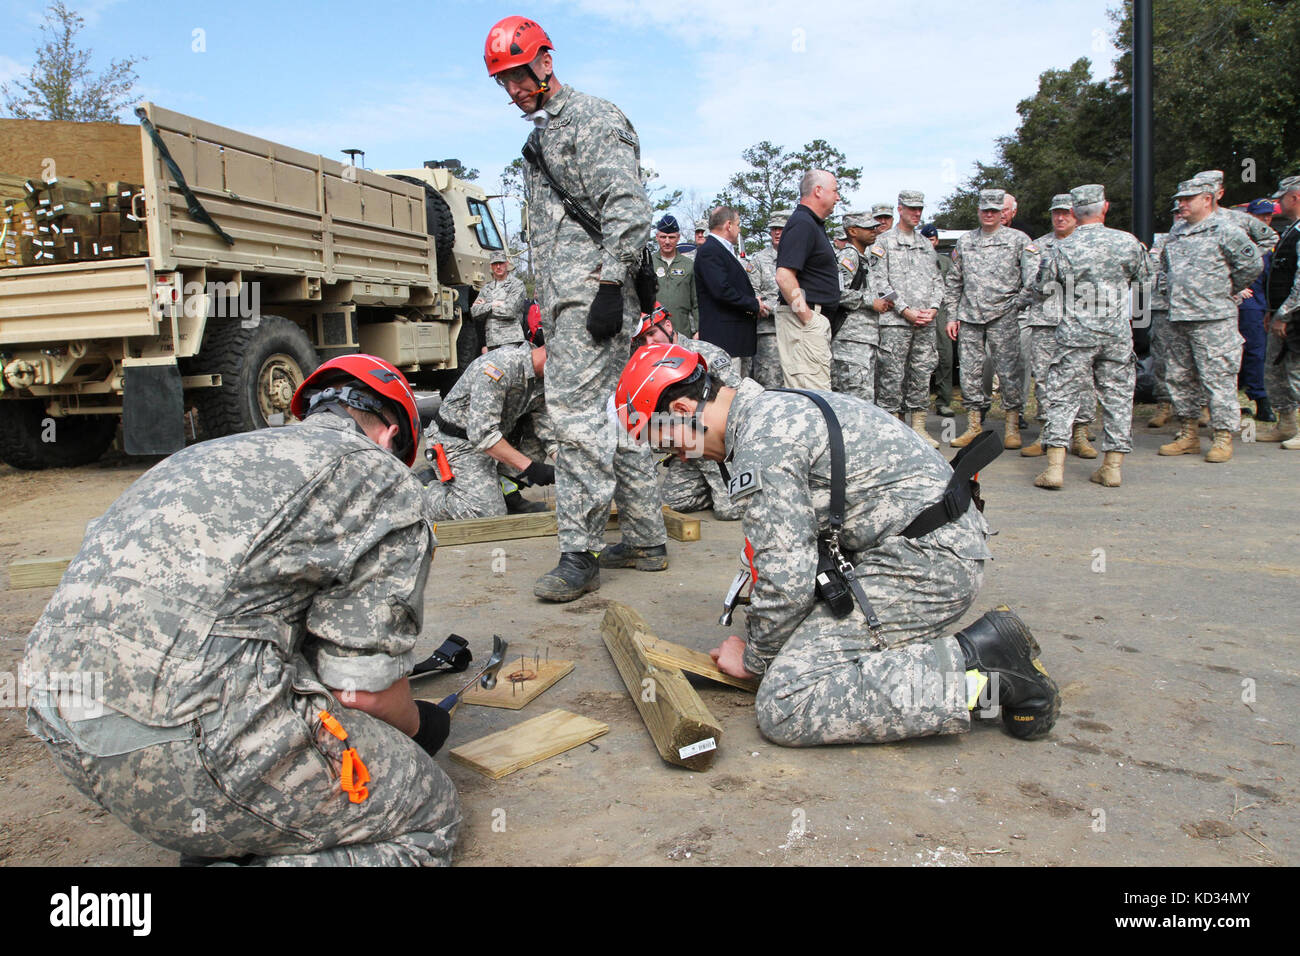 S.C. National Guard Soldiers from the 265th Engineer Detachment and 266th Fire Fighter Detachment hammer nails into boards that will be used to create supports to shore up the walls and roof of a building damaged for the training exercise, March 9, 2015, as Gen. Frank J. Grass, Chief, National Guard Bureau, Maj. Gen. Robert E. Livingston, Jr., Adjutant General for South Carolina and other dignitaries look on at Choppee Regional Resource Center (CRRC) in Georgetown, S.C. The training was part of Vigilant Guard 15, a training exercise consisting of National Guard Soldiers from South Carolina and Stock Photo